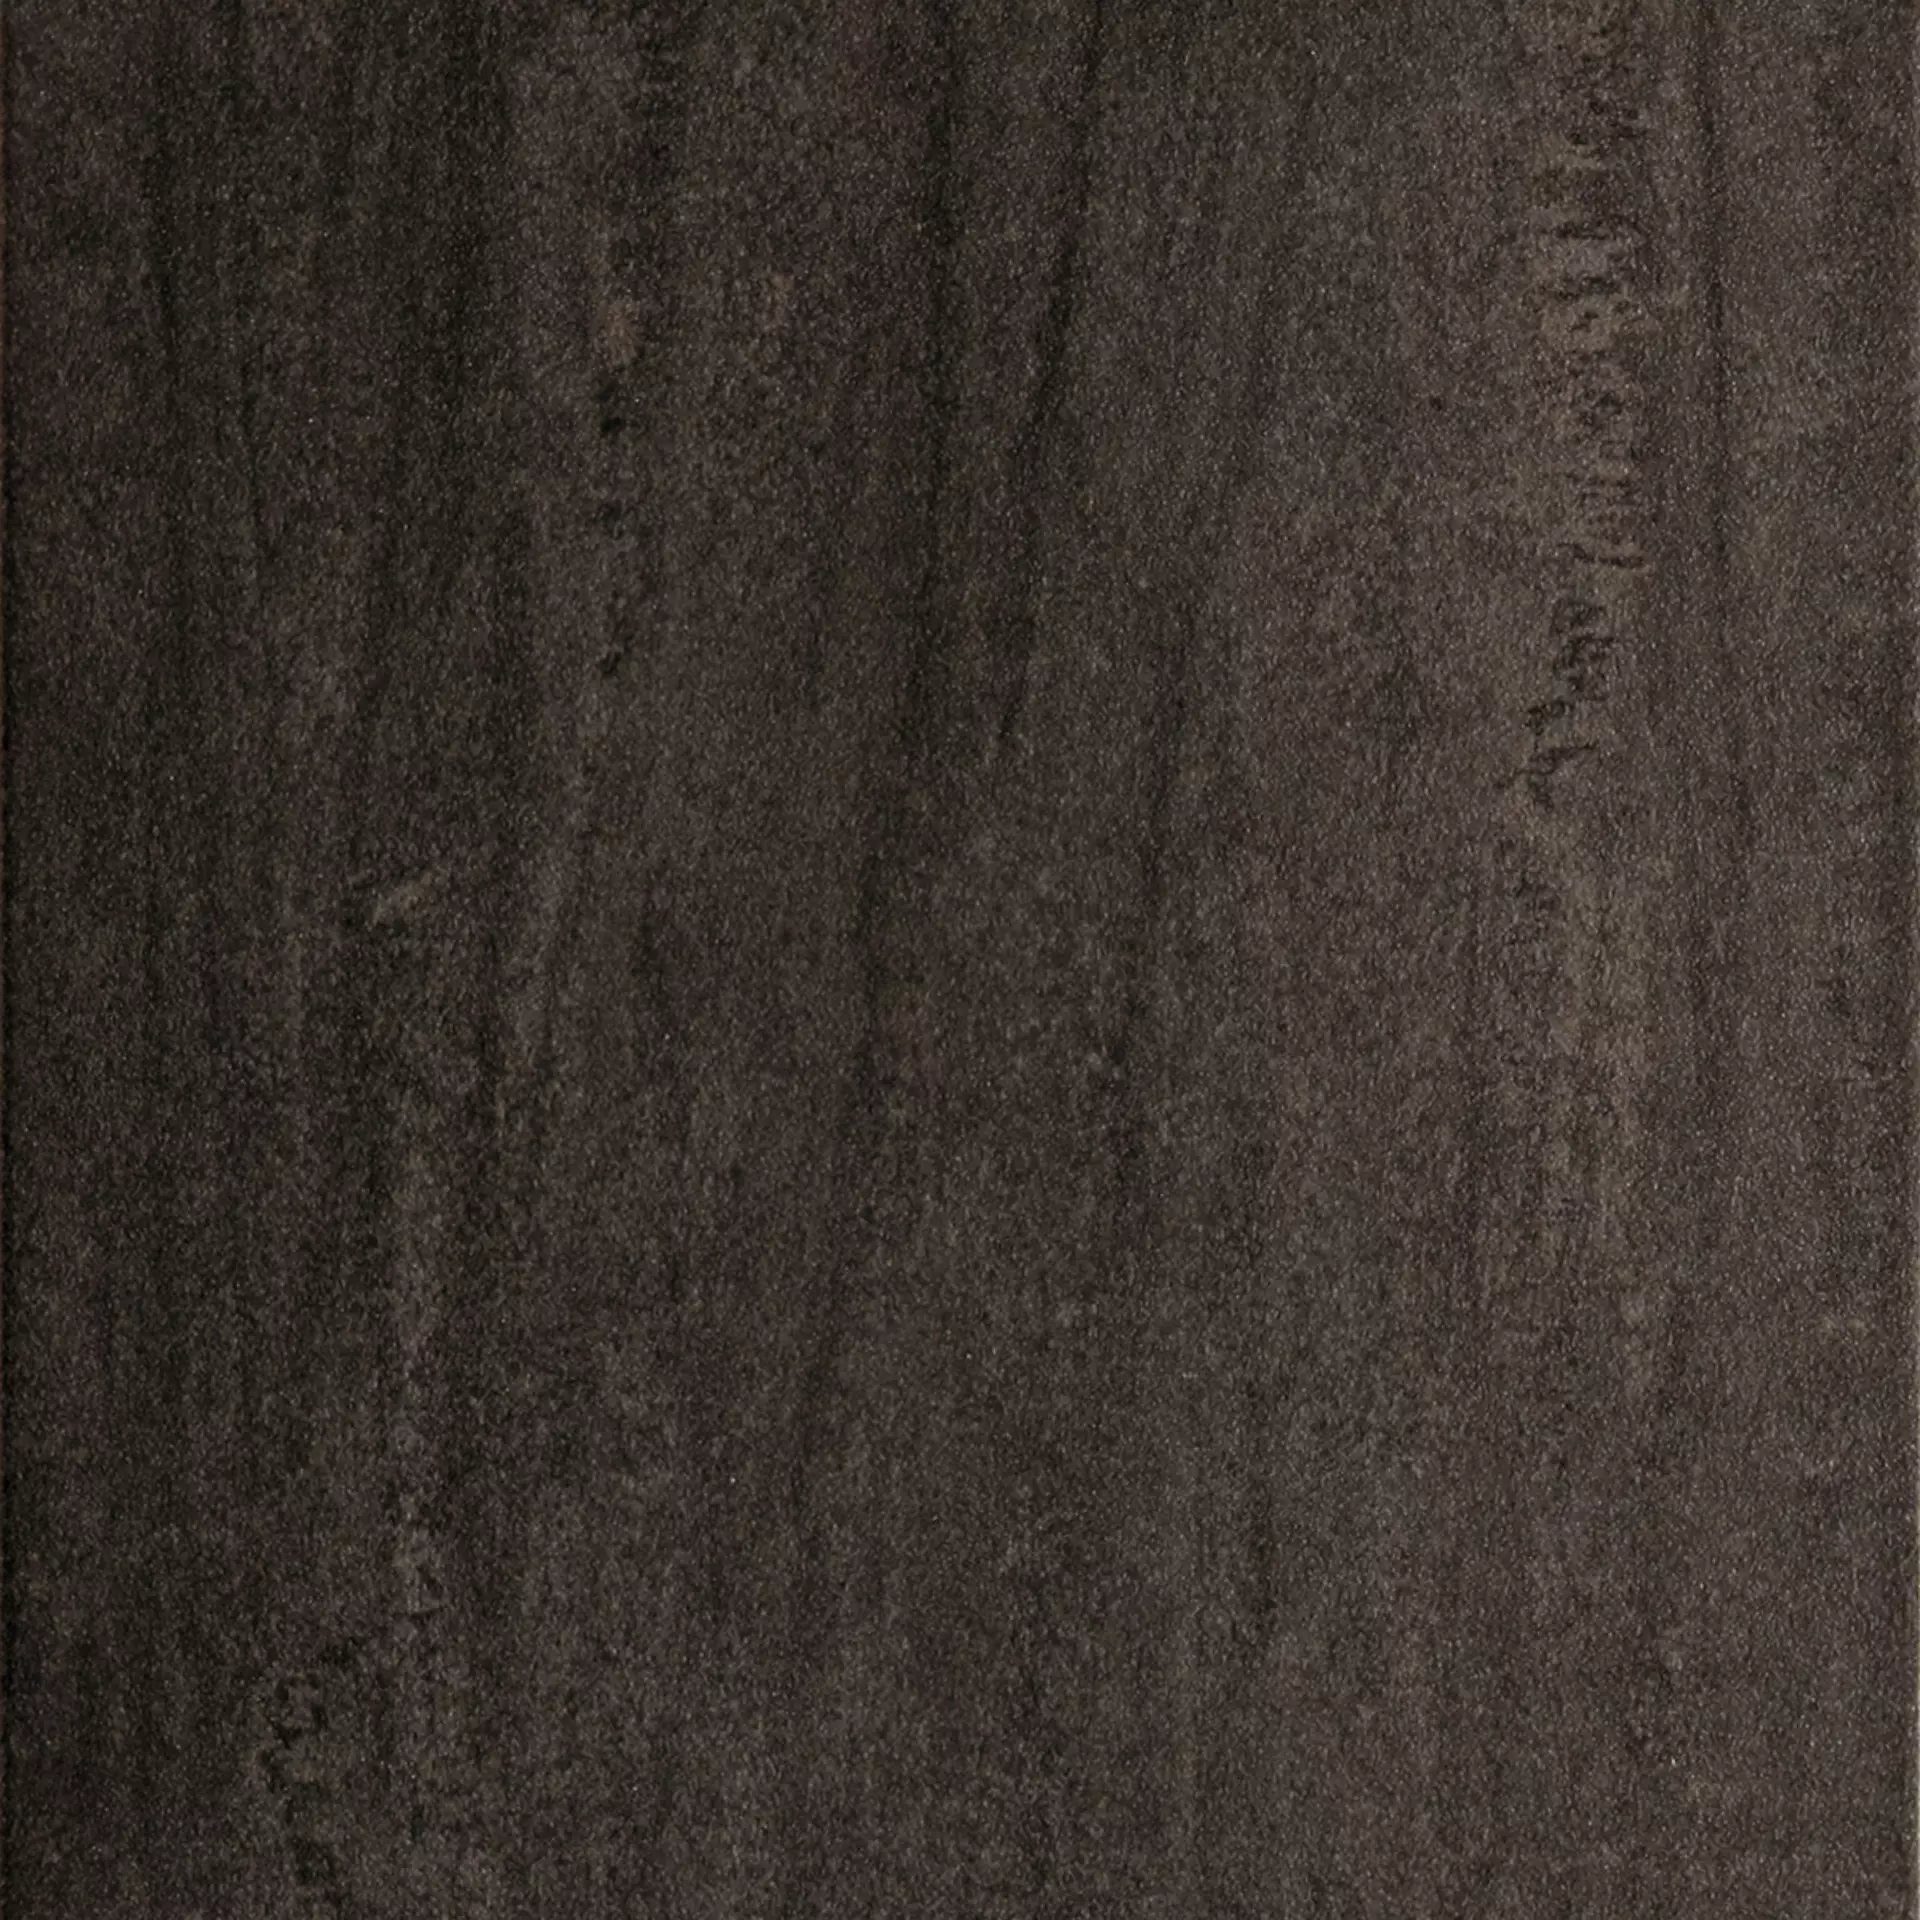 Rondine Contract Anthracite Naturale J84028 60,5x60,5cm 9,5mm